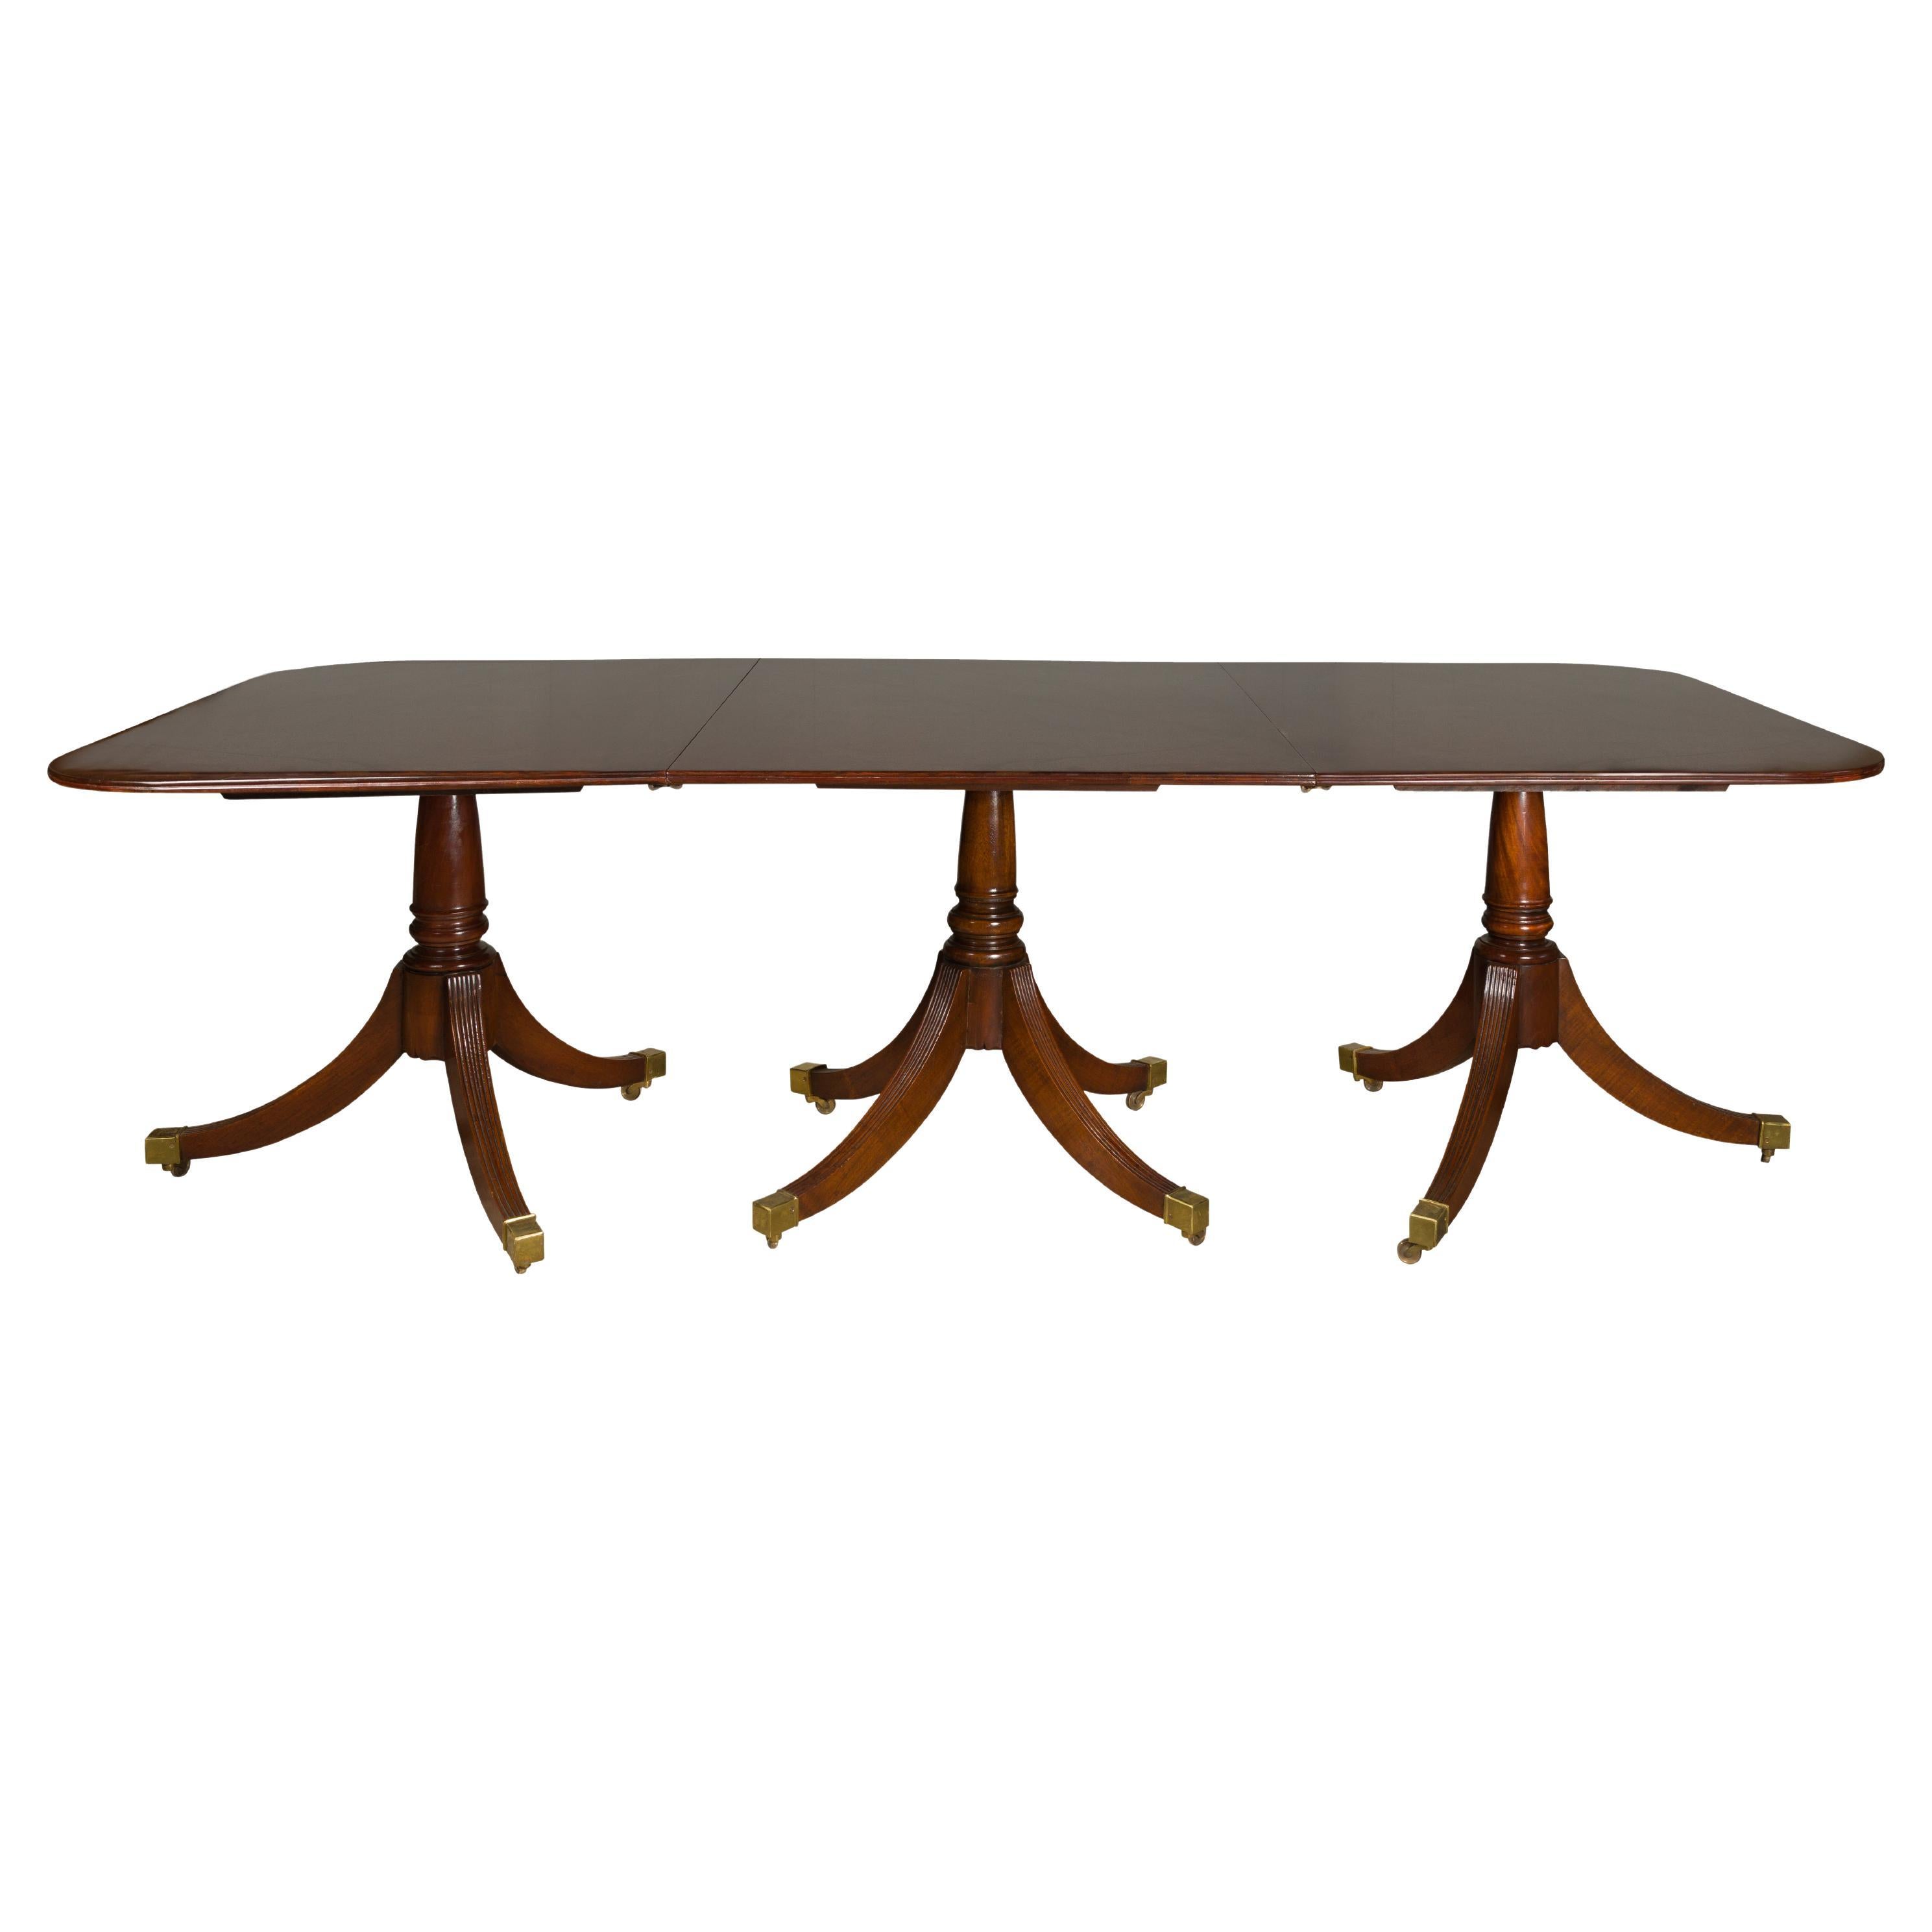 English Turn of the Century Mahogany Extension Dining Table with Quadripod Base For Sale